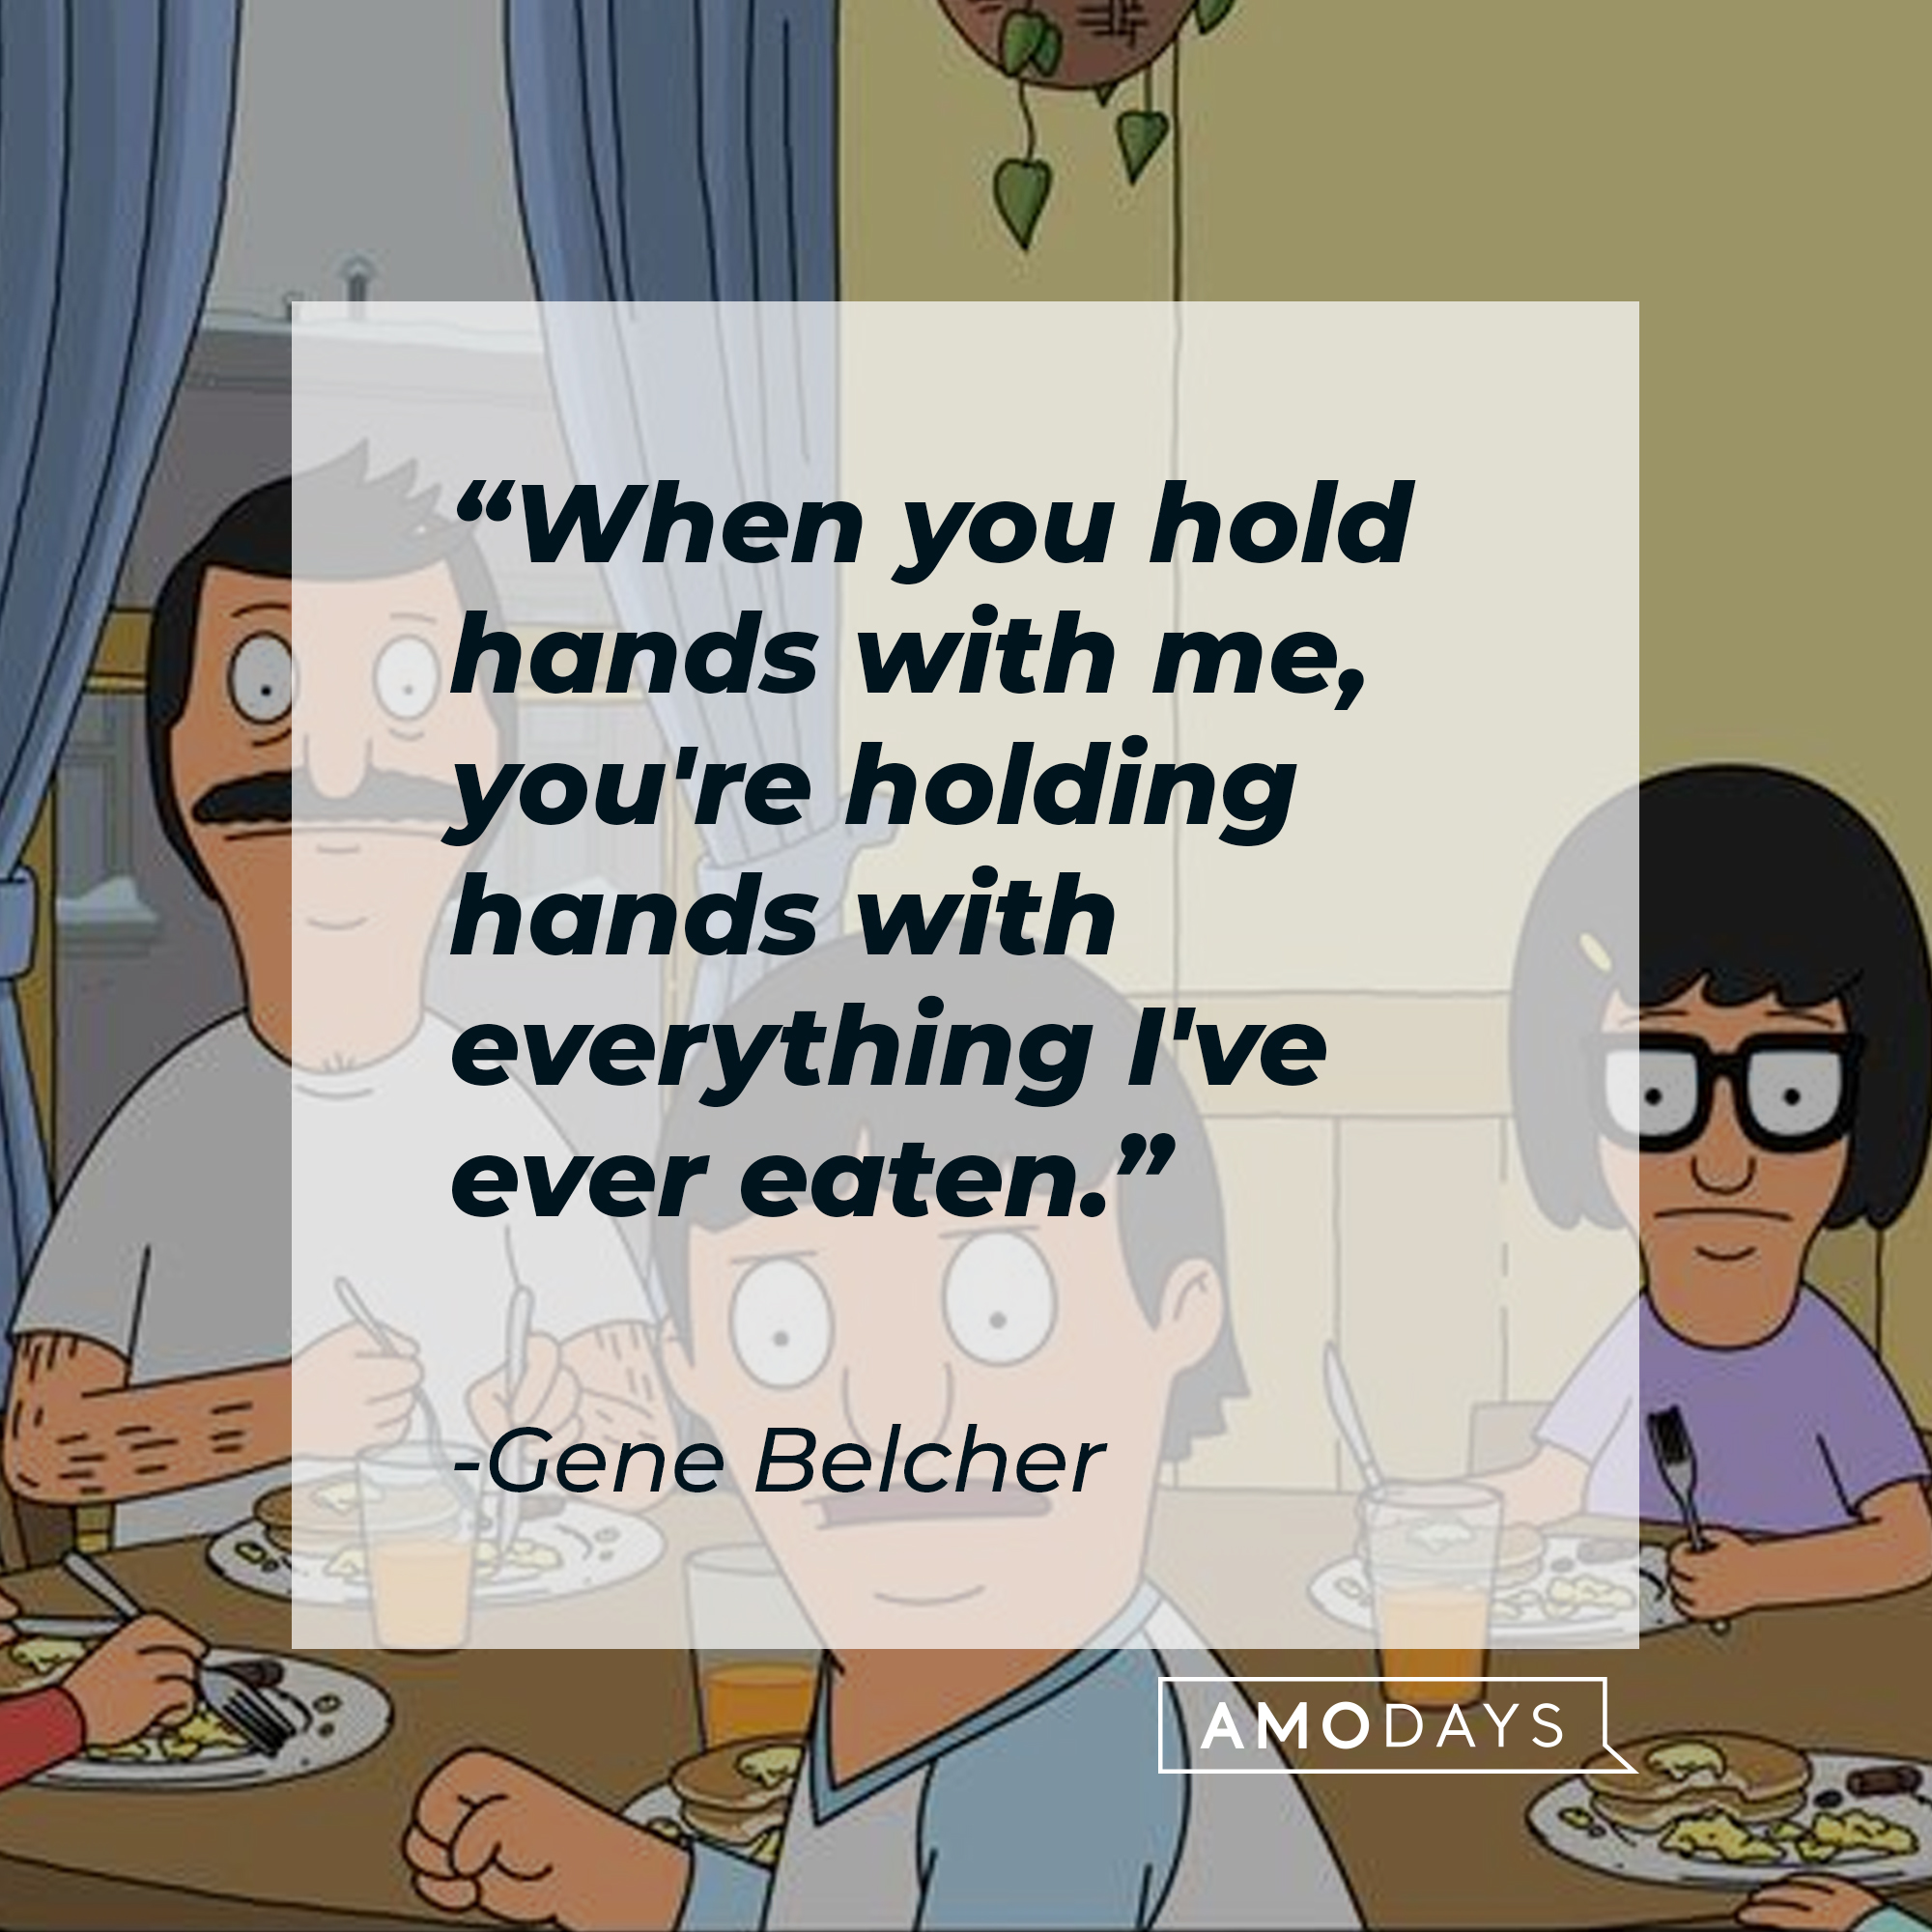 Characters from “Bob’s Burger’s,” including Gene Belcher, with his quote: “When you hold hands with me, you're holding hands with everything I've ever eaten.” | Source: Facebook.com/BobsBurgers